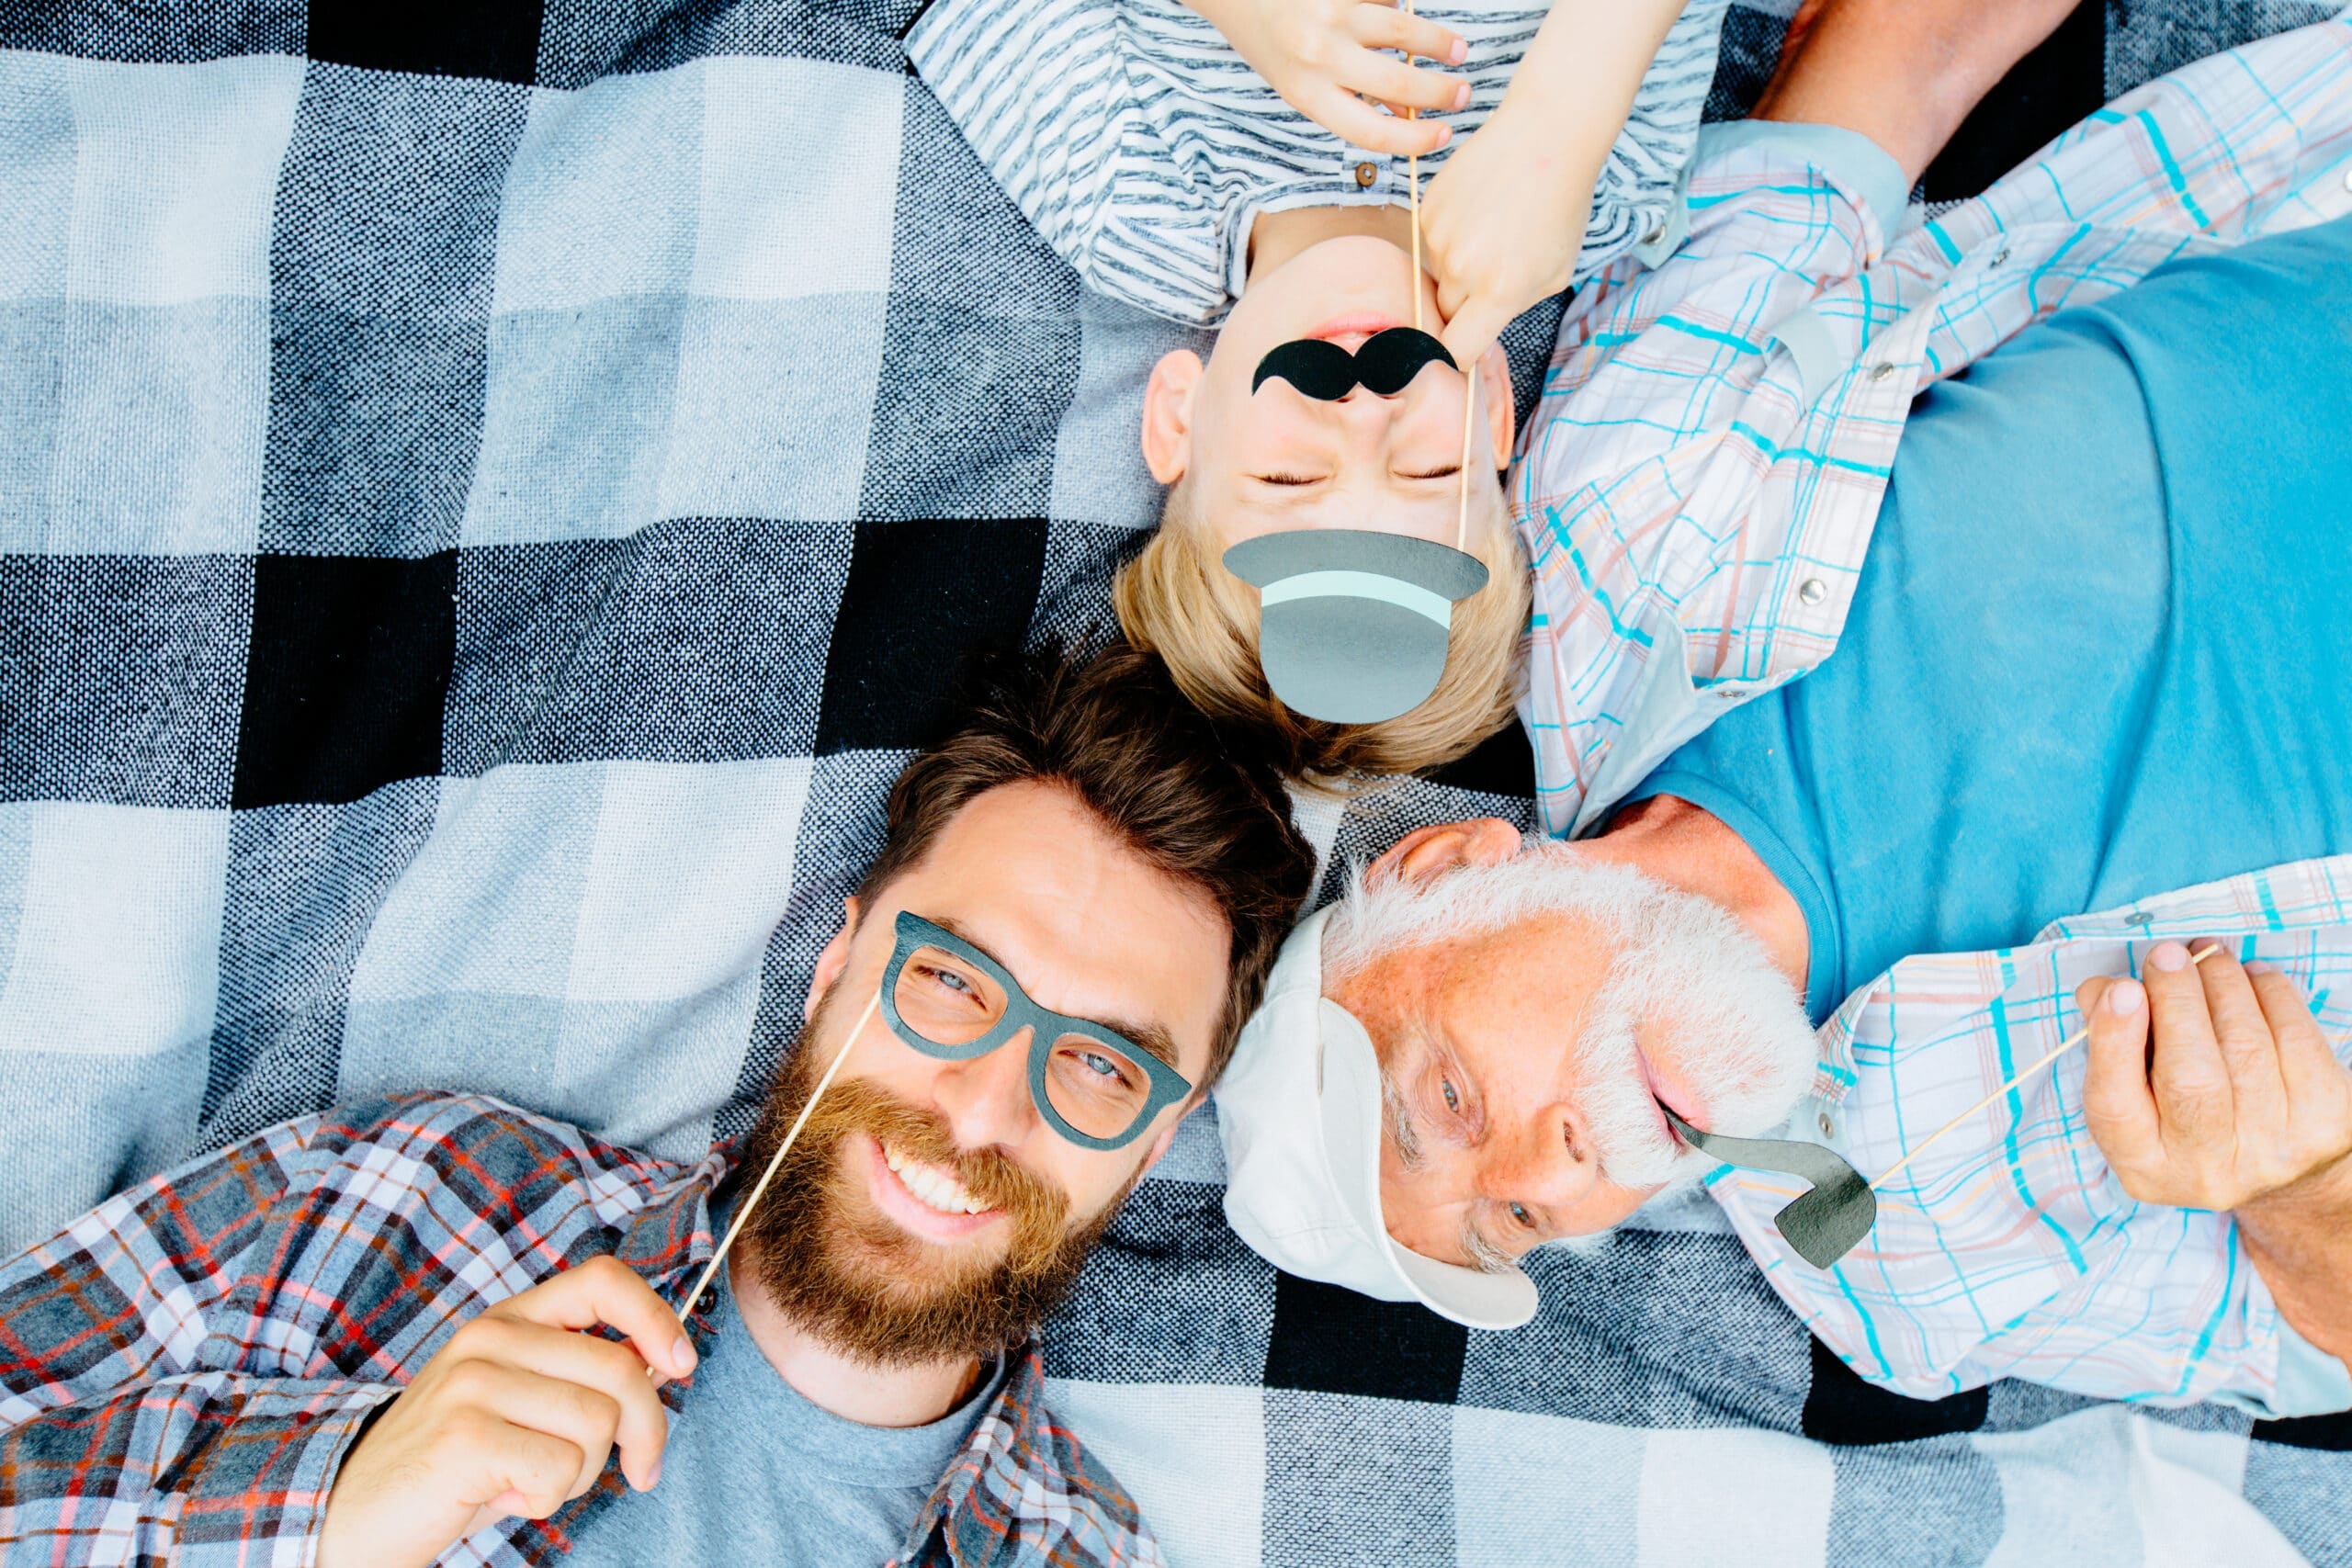 Grandfather,father and son enjoying together lying on a checkered blanket. Tree men of different ages smiling playing with fake mustache, hat, glasses. Top view of boy and his dad, granddad with smile